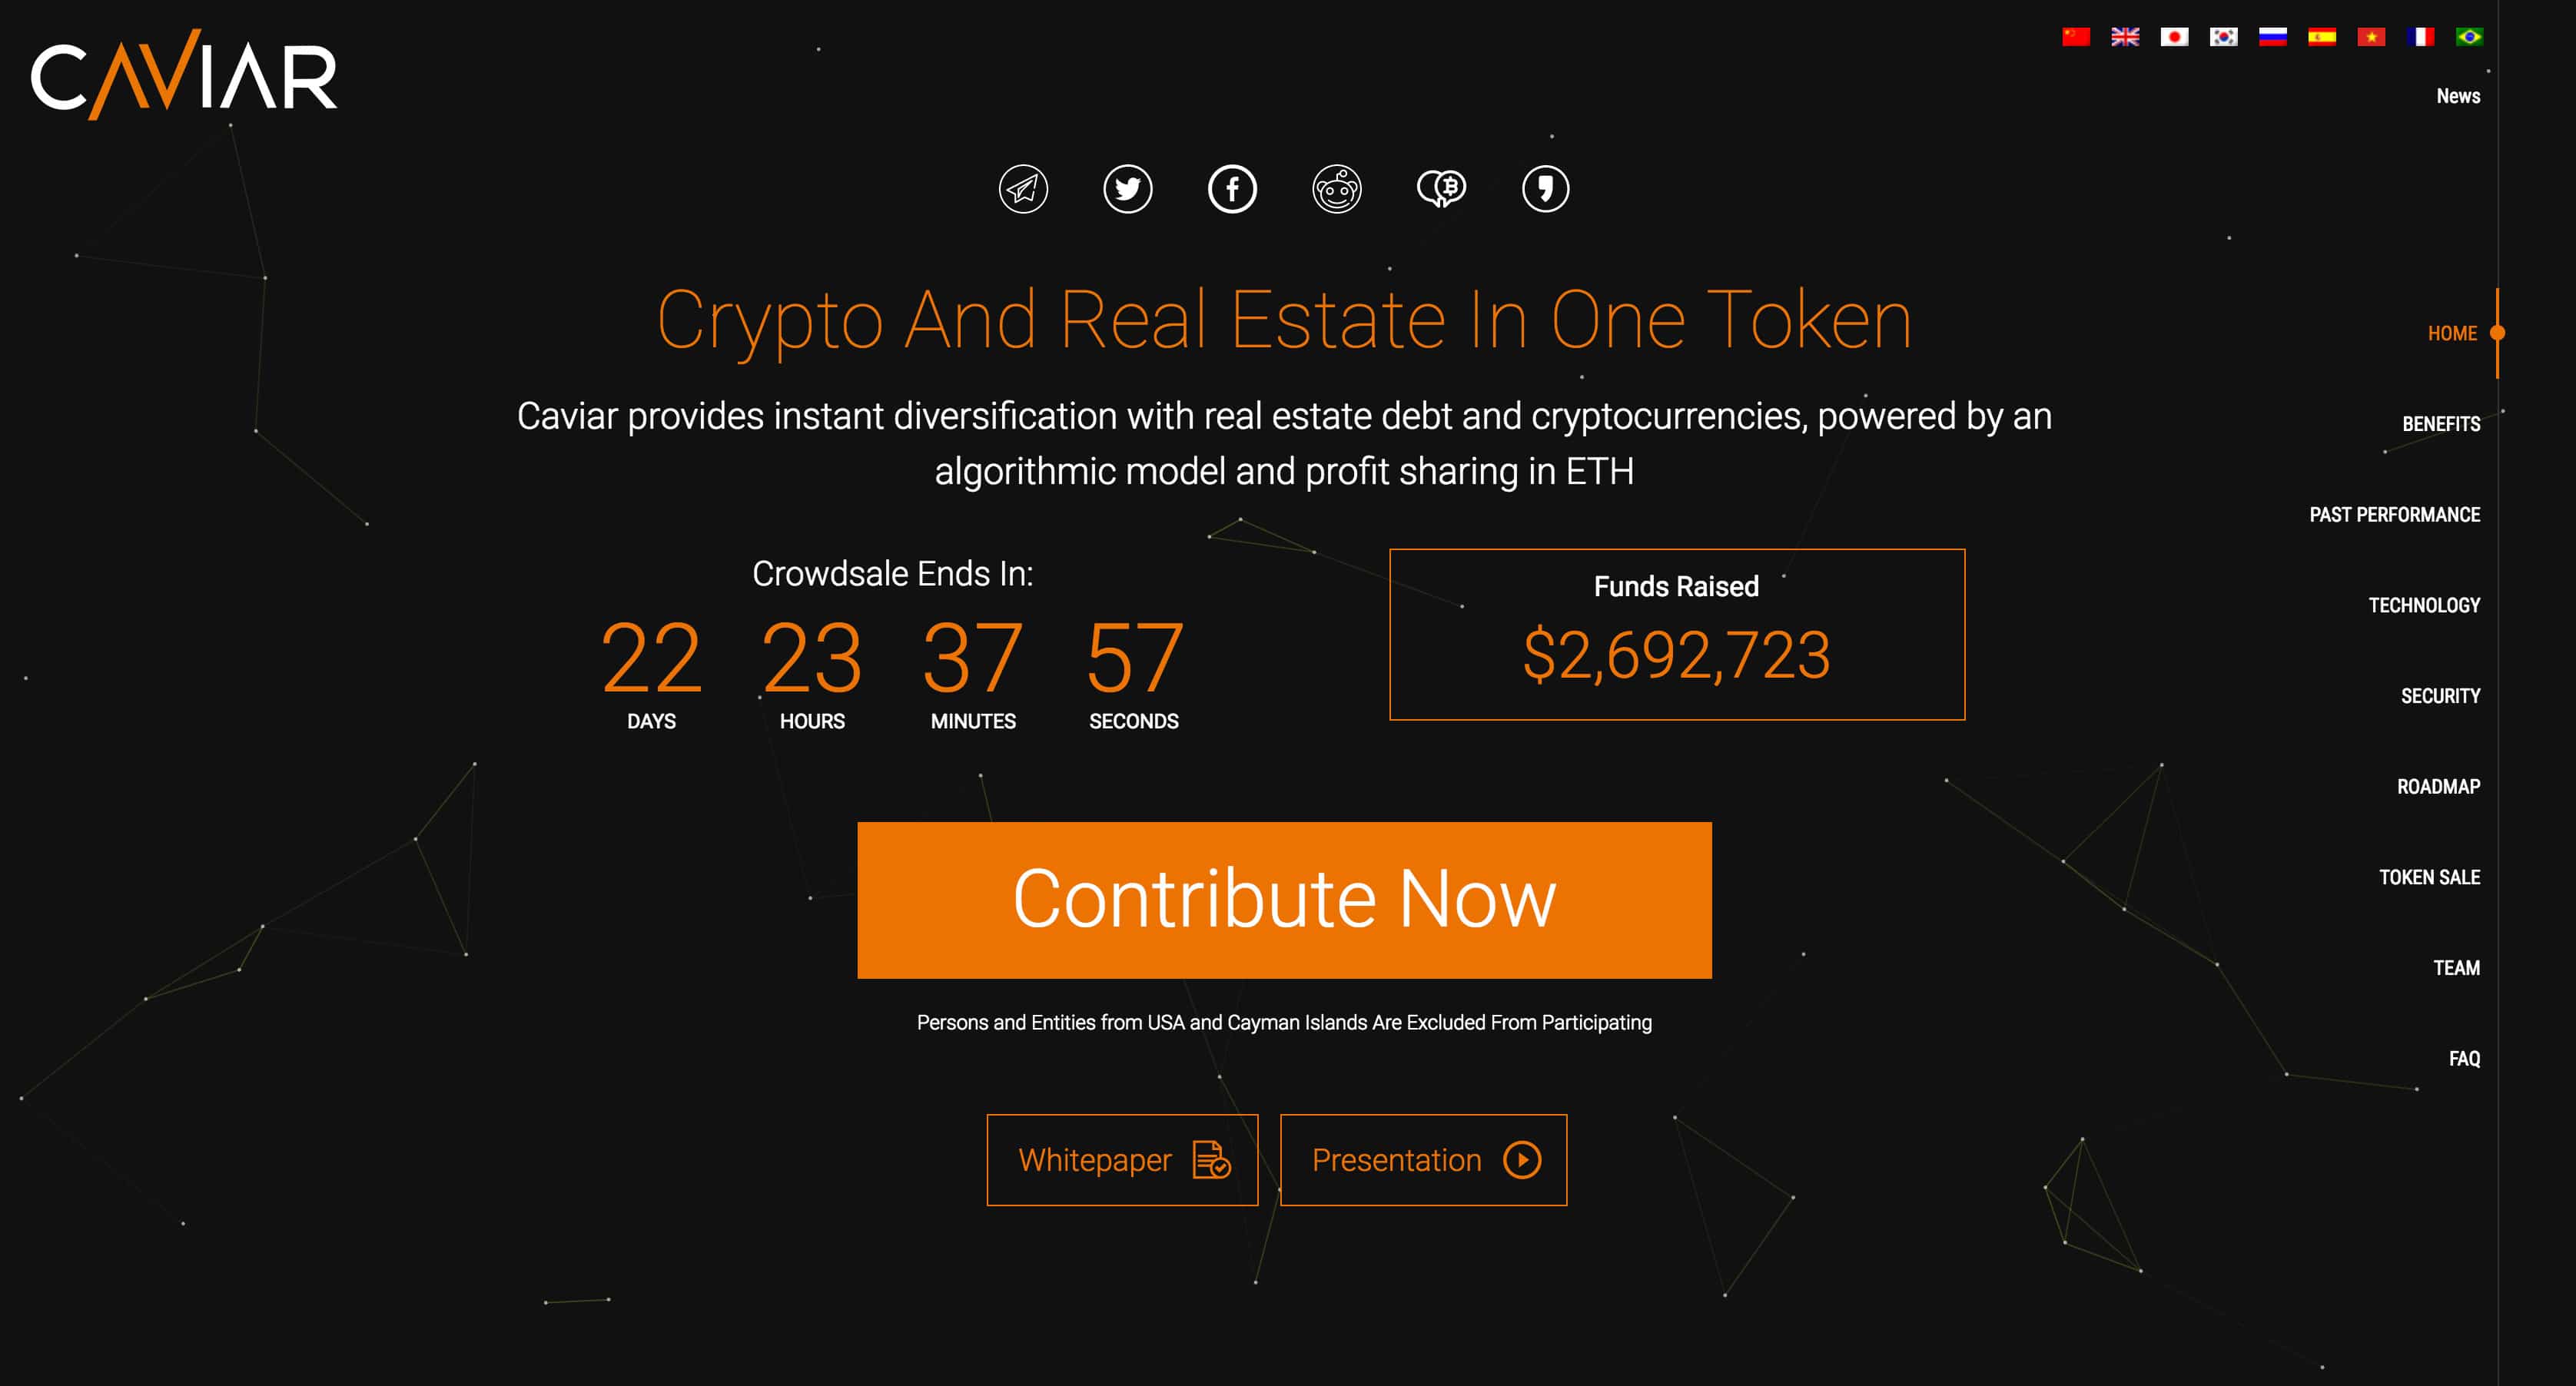 Caviar: Crypto-investment And Real Estate-backed Short-term Loans On The Blockchain